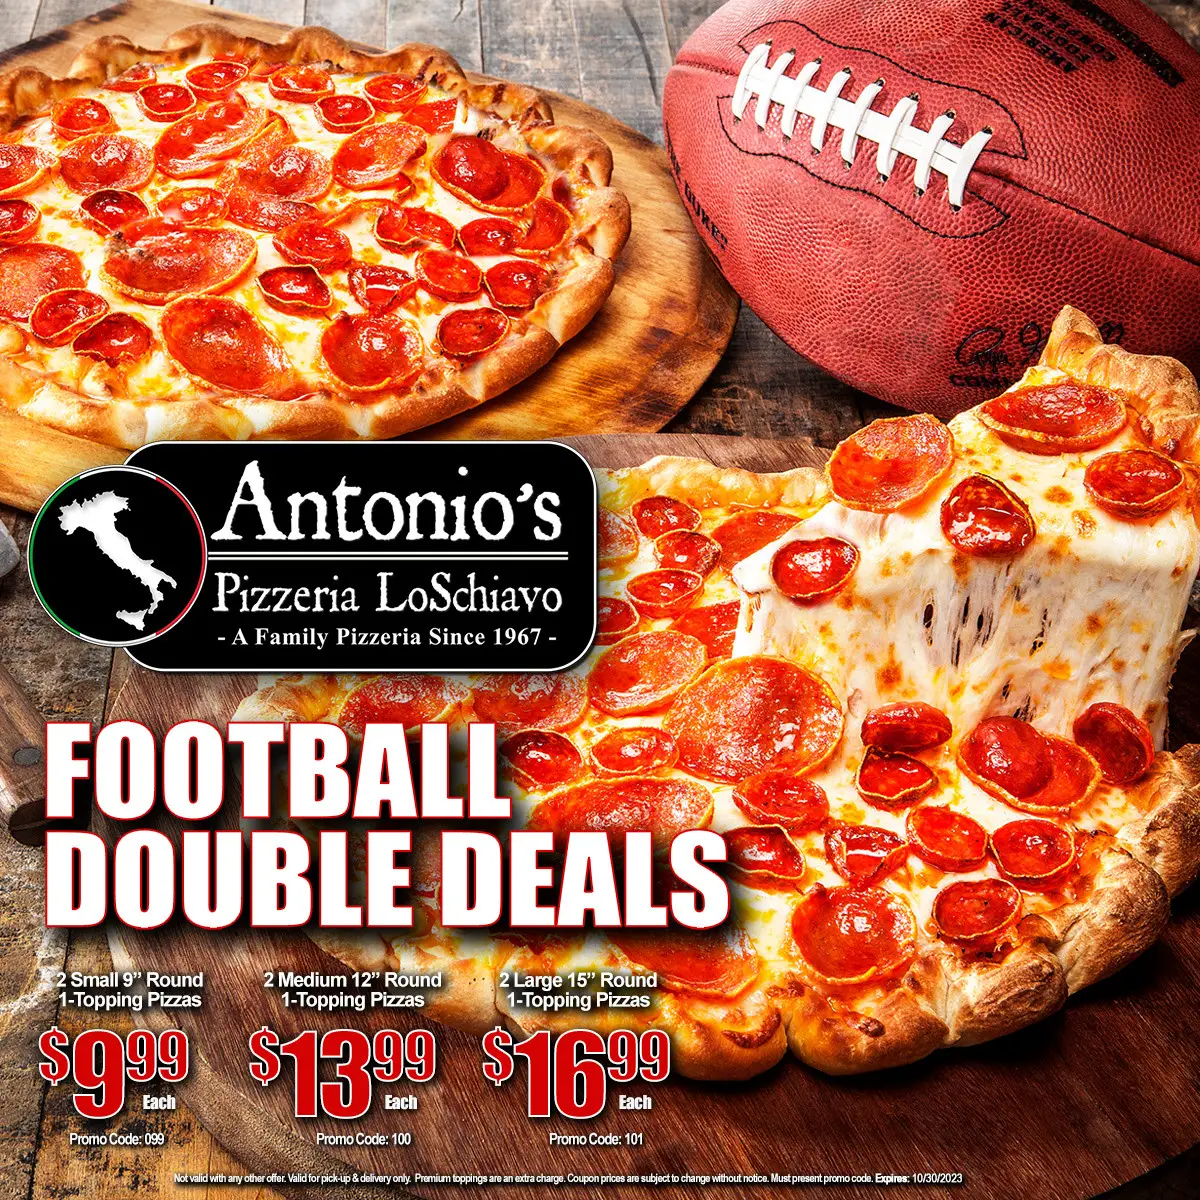 Antonio's Pizza National Pizza Week Double Deal (Medium): 2 Medium 12-inch Round 1-Topping Pizzas for $12.99 Each